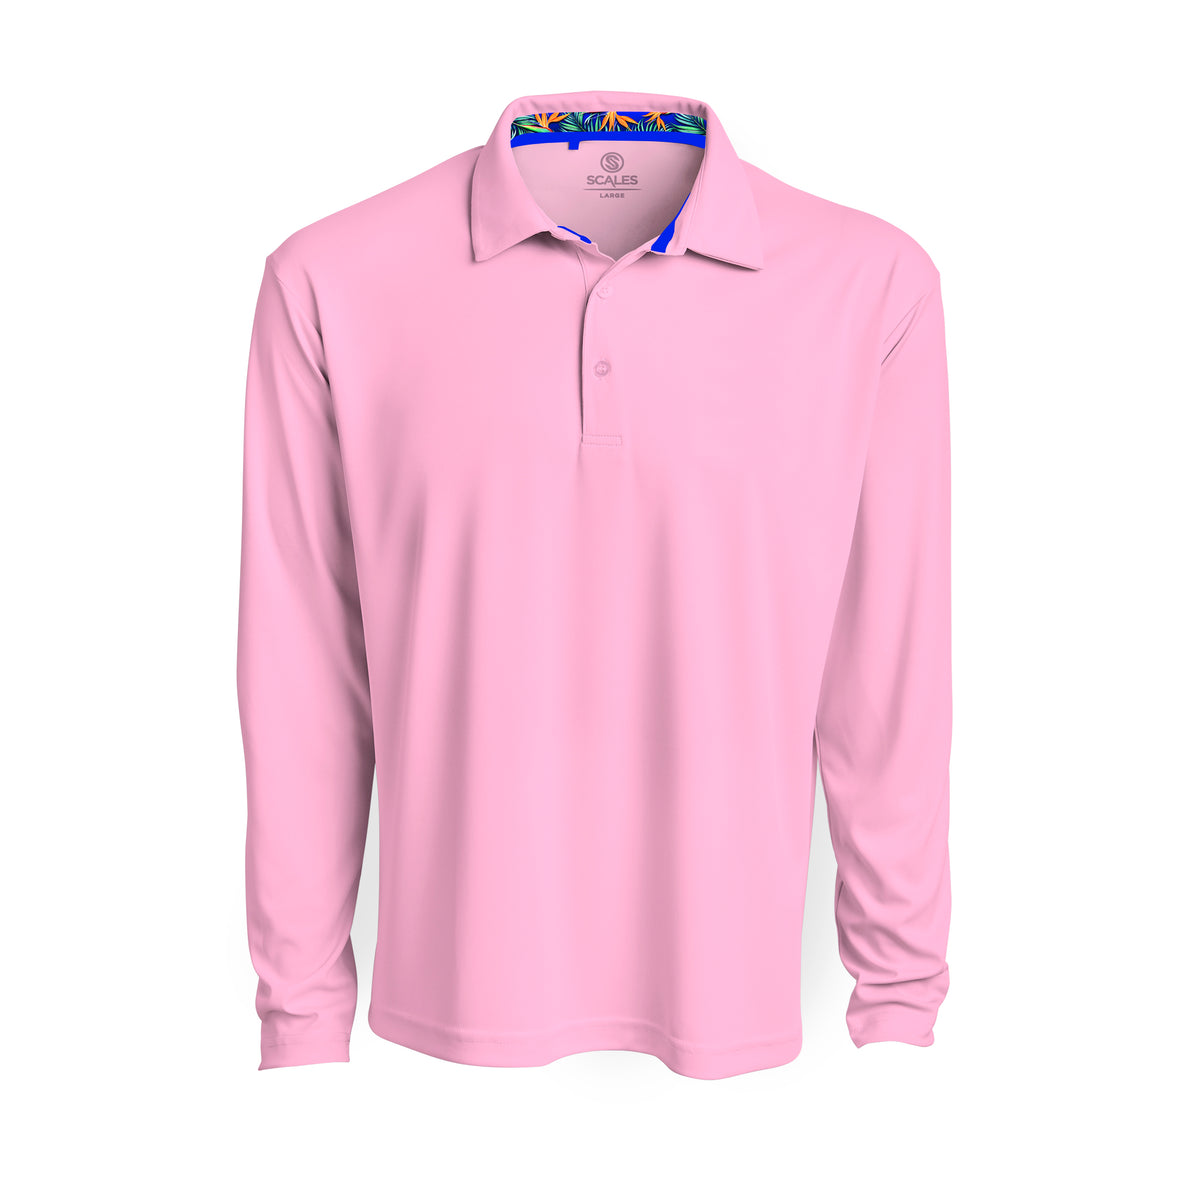 Offshore Core L/S Polo - Light Pink / S